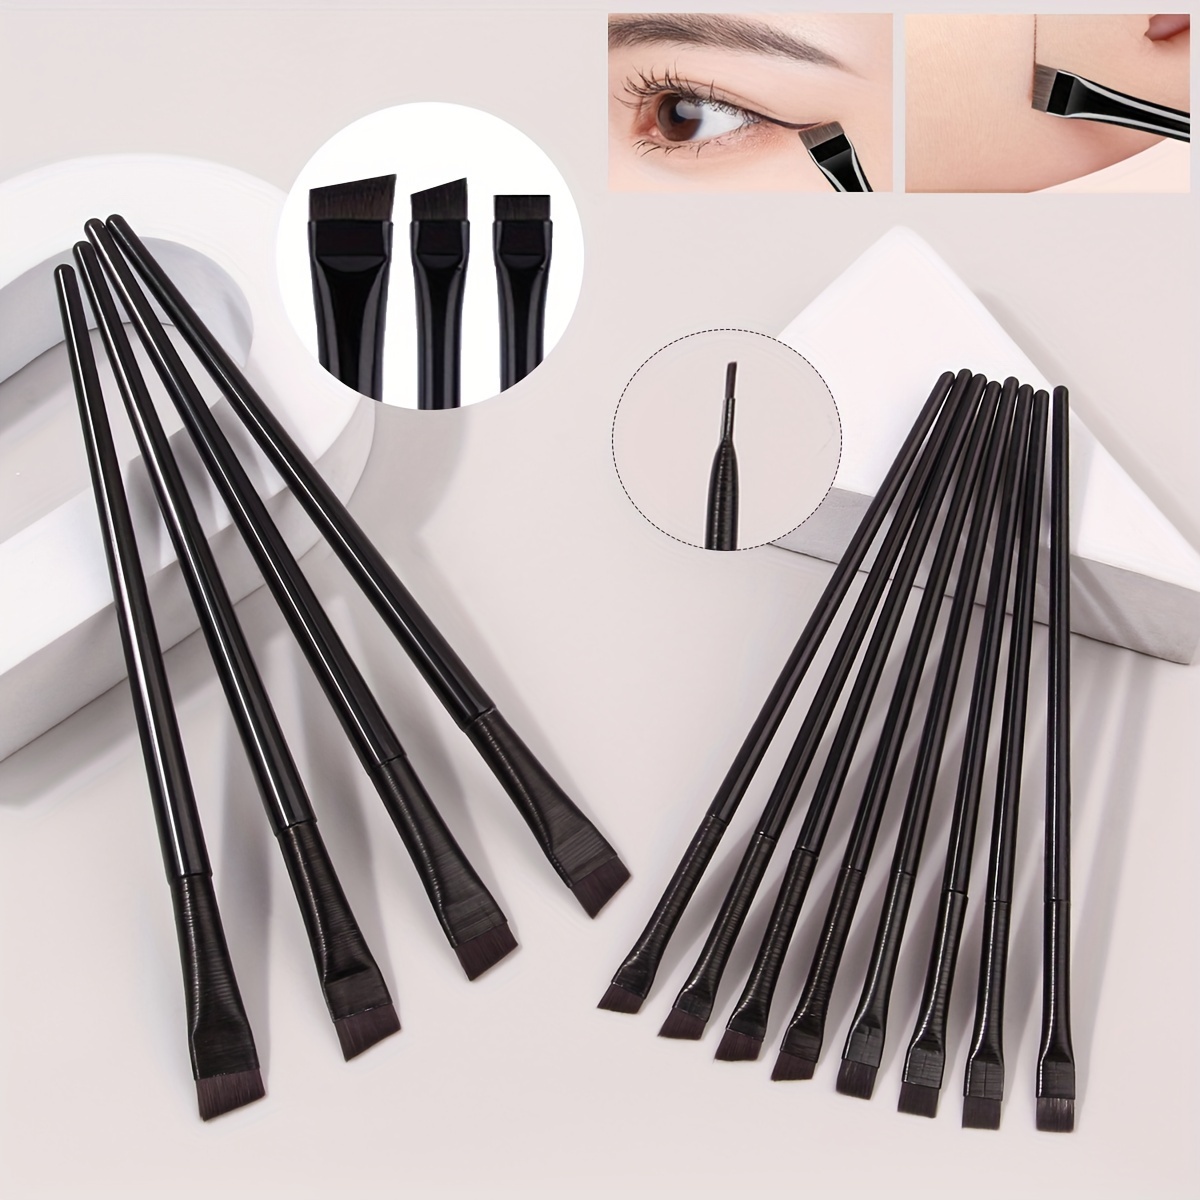 

12pcs Black Ultra-fine Eyeliner Brushes, Thin Precision Eye Liner Brush Set, Professional Makeup Tools For Delicate Eye Contouring And Brow Powder Application